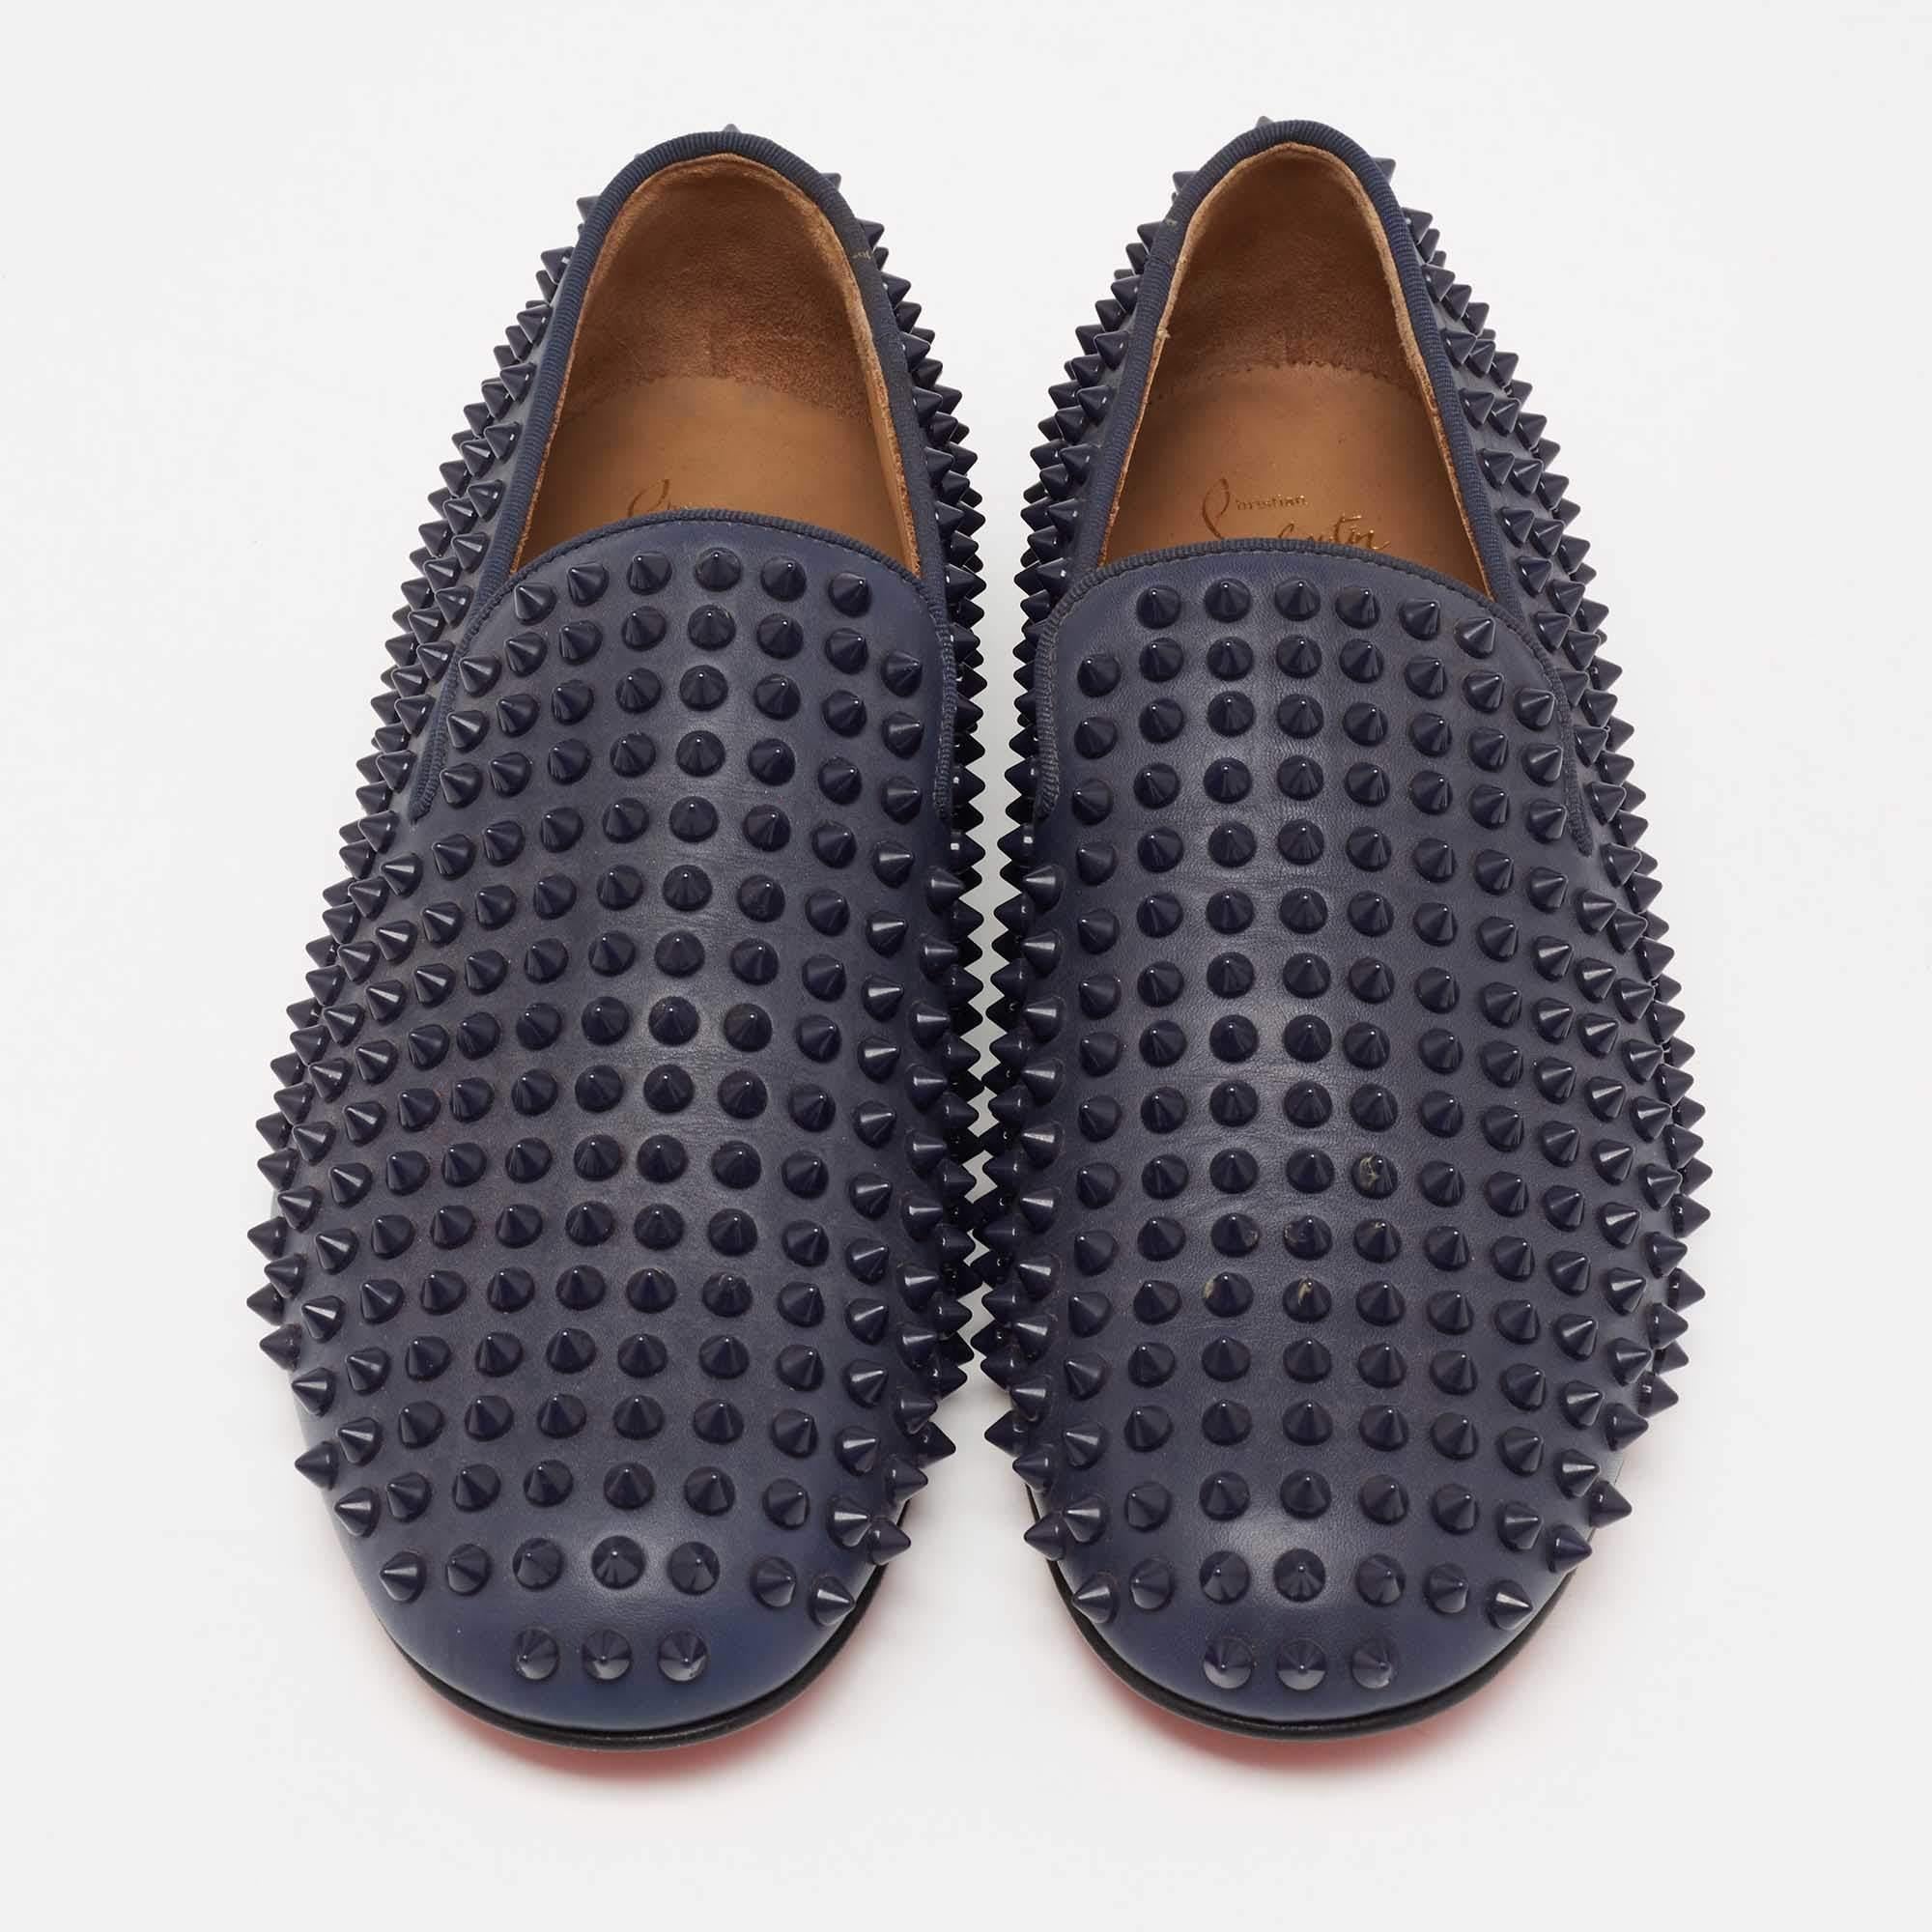 Crafted from navy blue leather, these smoking slippers from Christian Louboutin simply stand out! They feature a round-toe silhouette with the signature spike embellishments adorning the exterior. They are complete with comfortable leather-lined